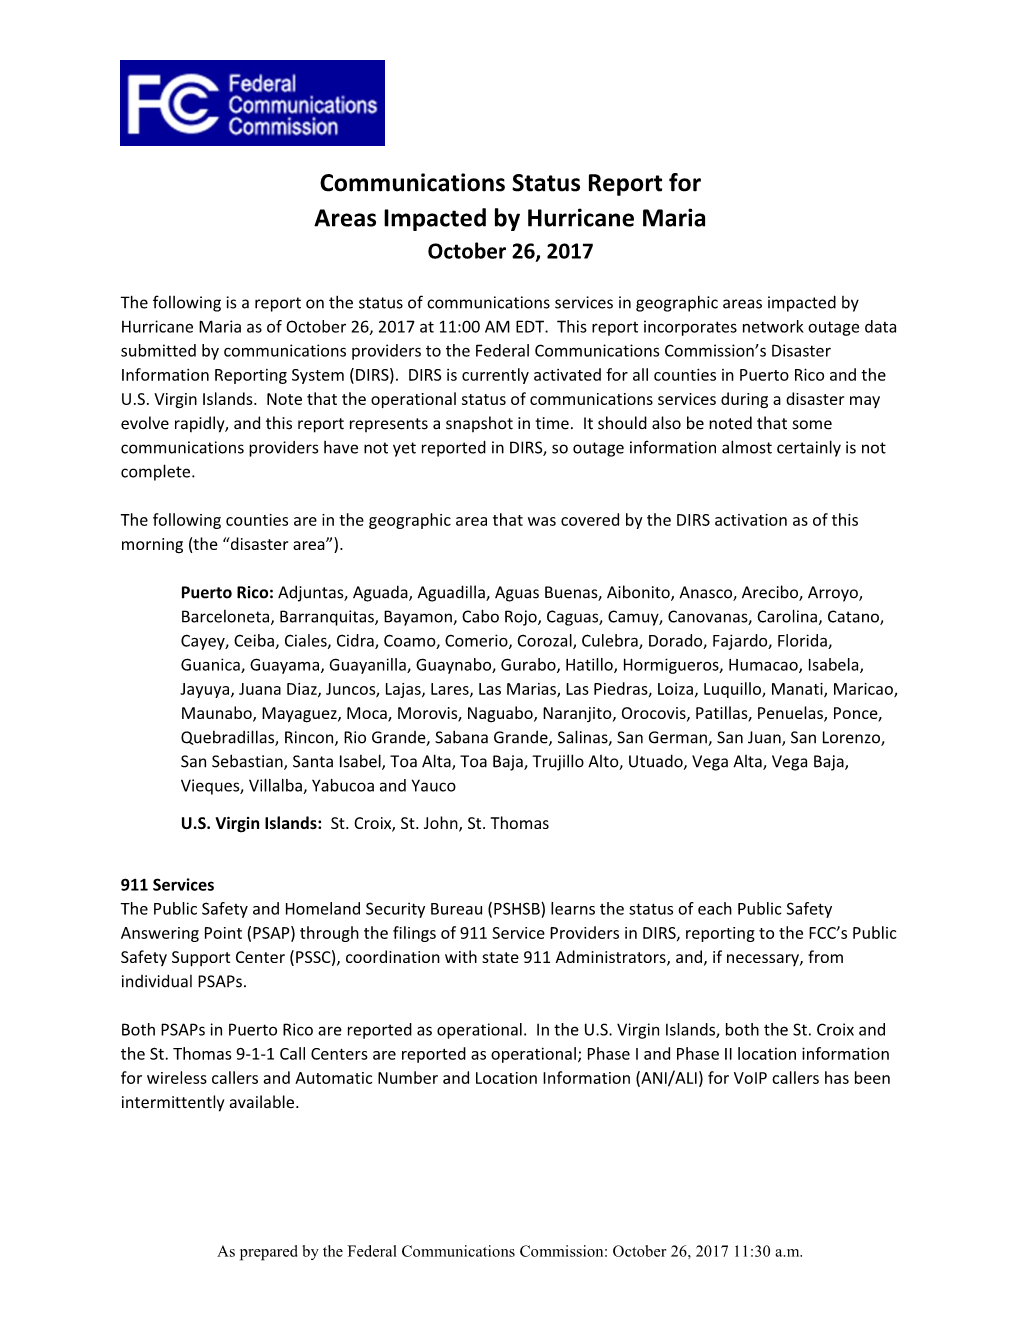 Communications Status Report for Areas Impacted by Hurricane Maria October 26, 2017